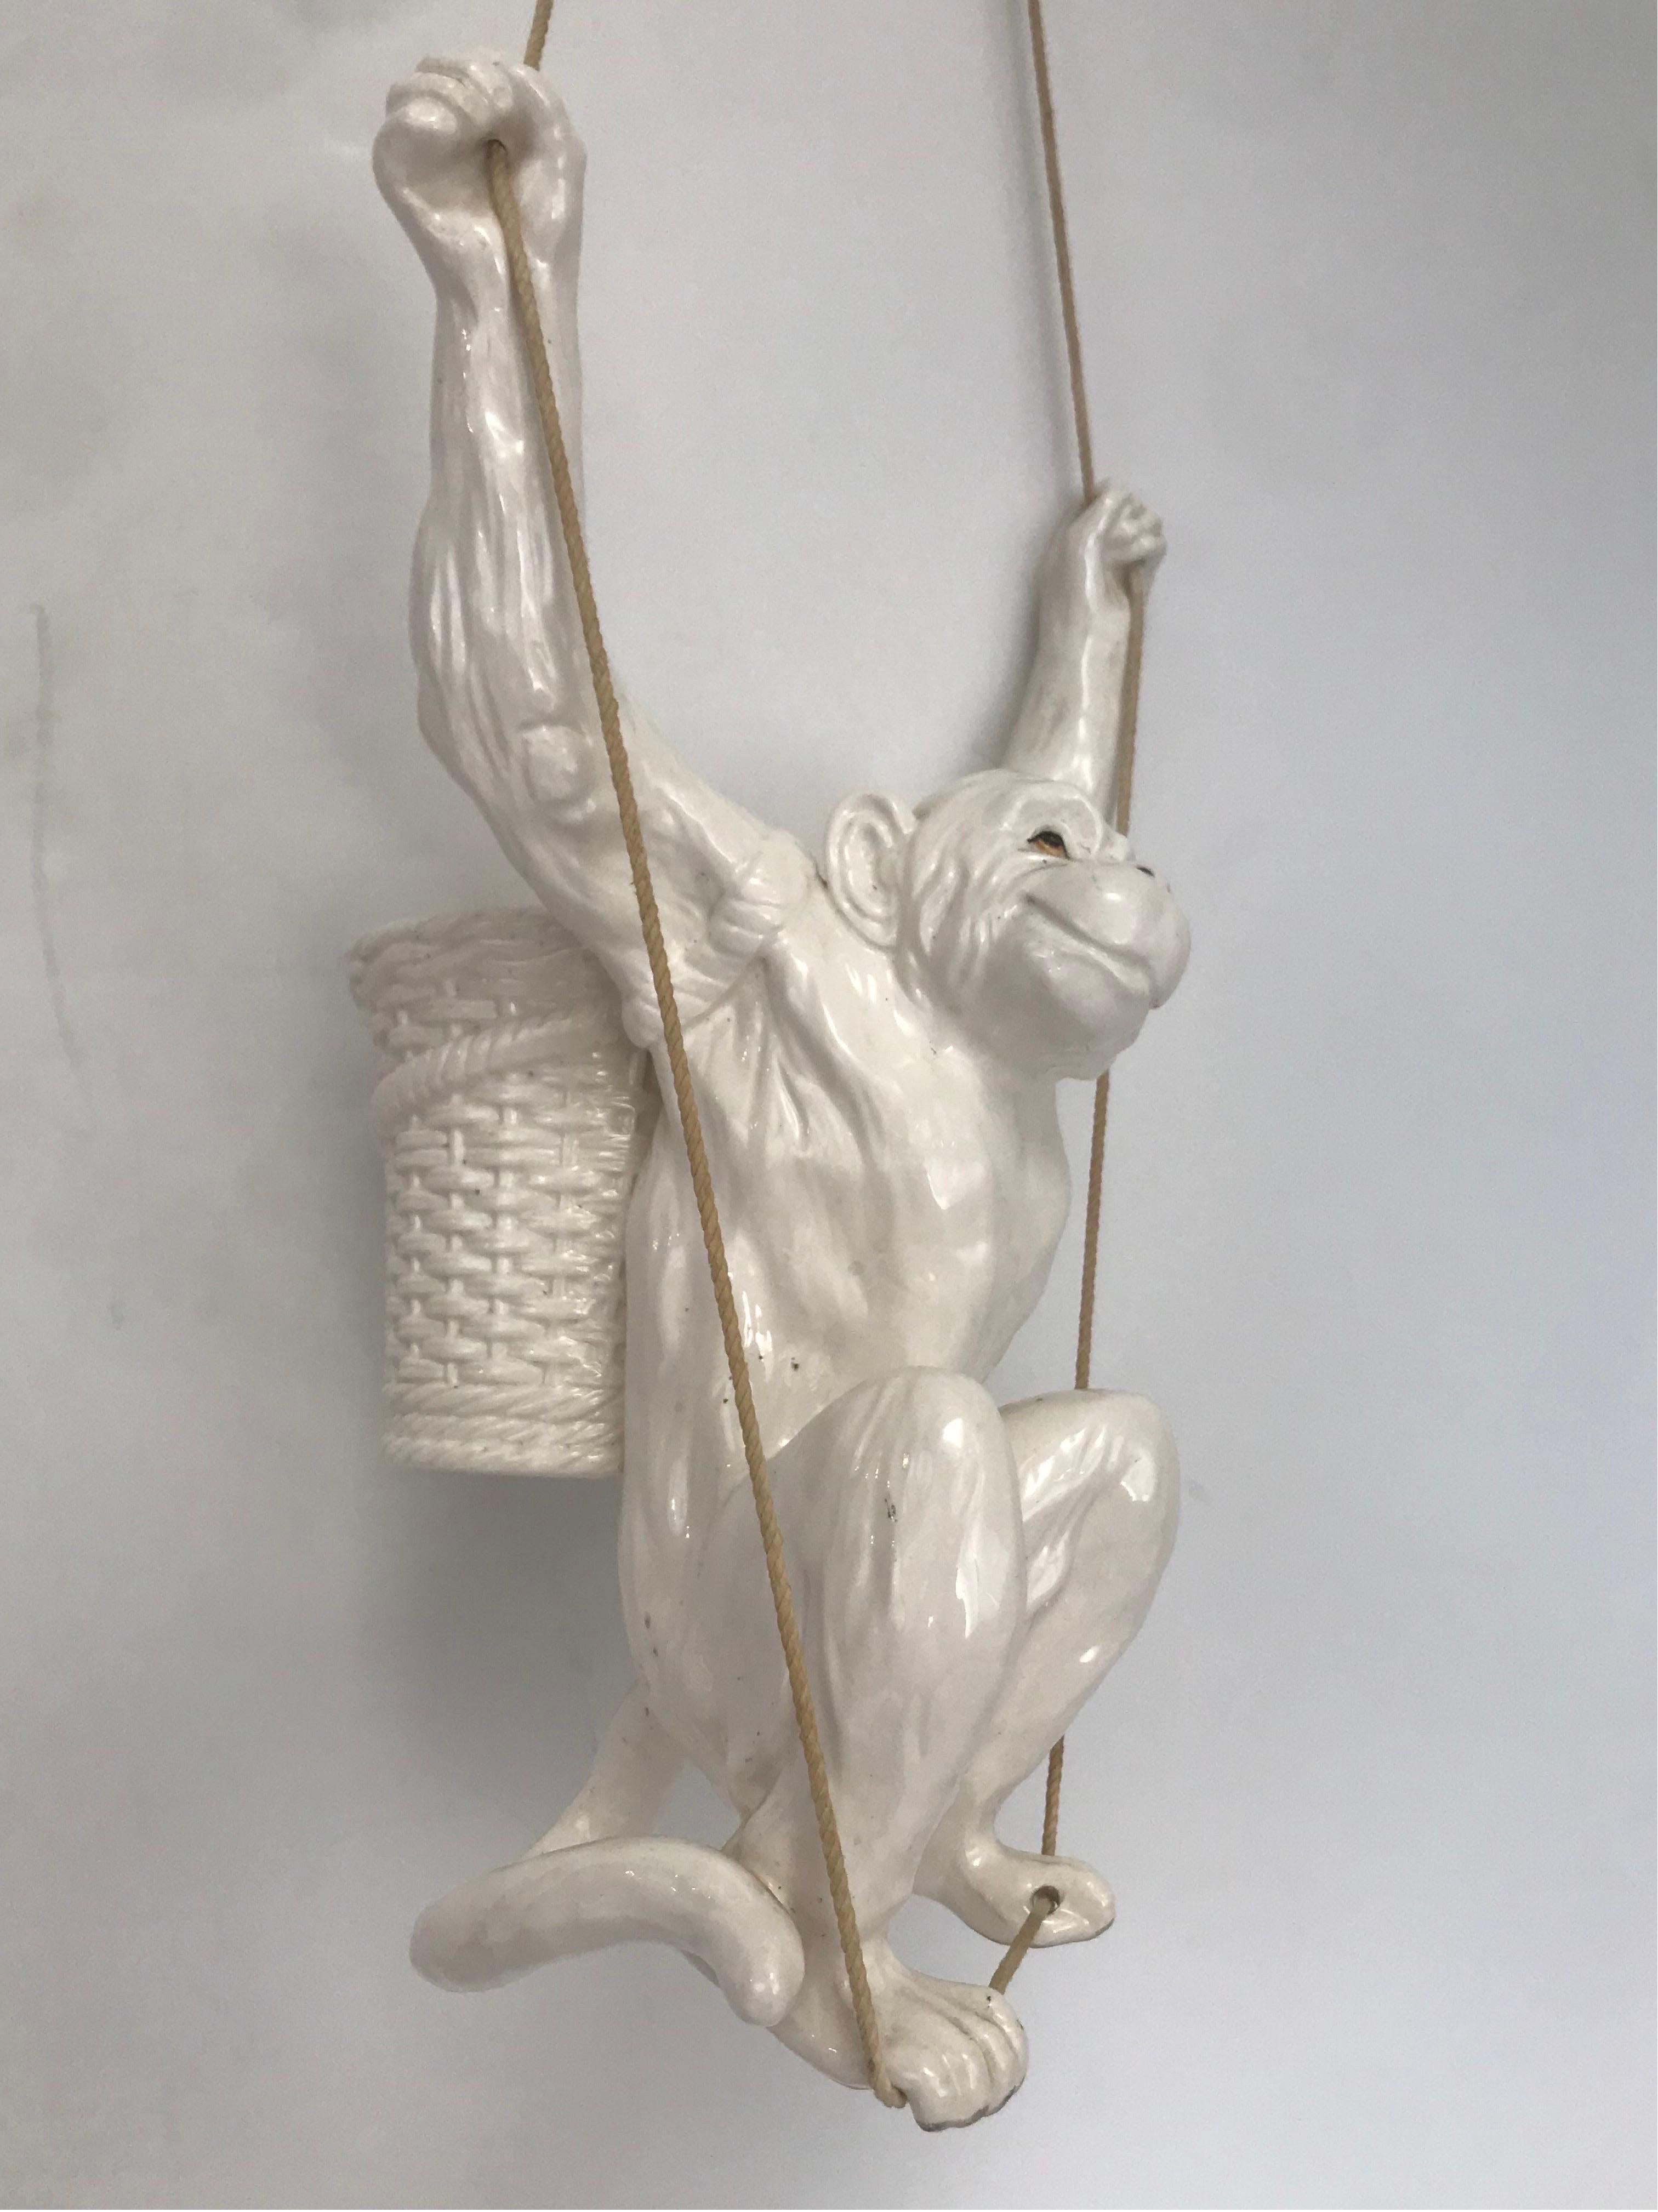 Hanging Ceramic Monkey Planter by Fits and Floyd, 1976 For Sale 5